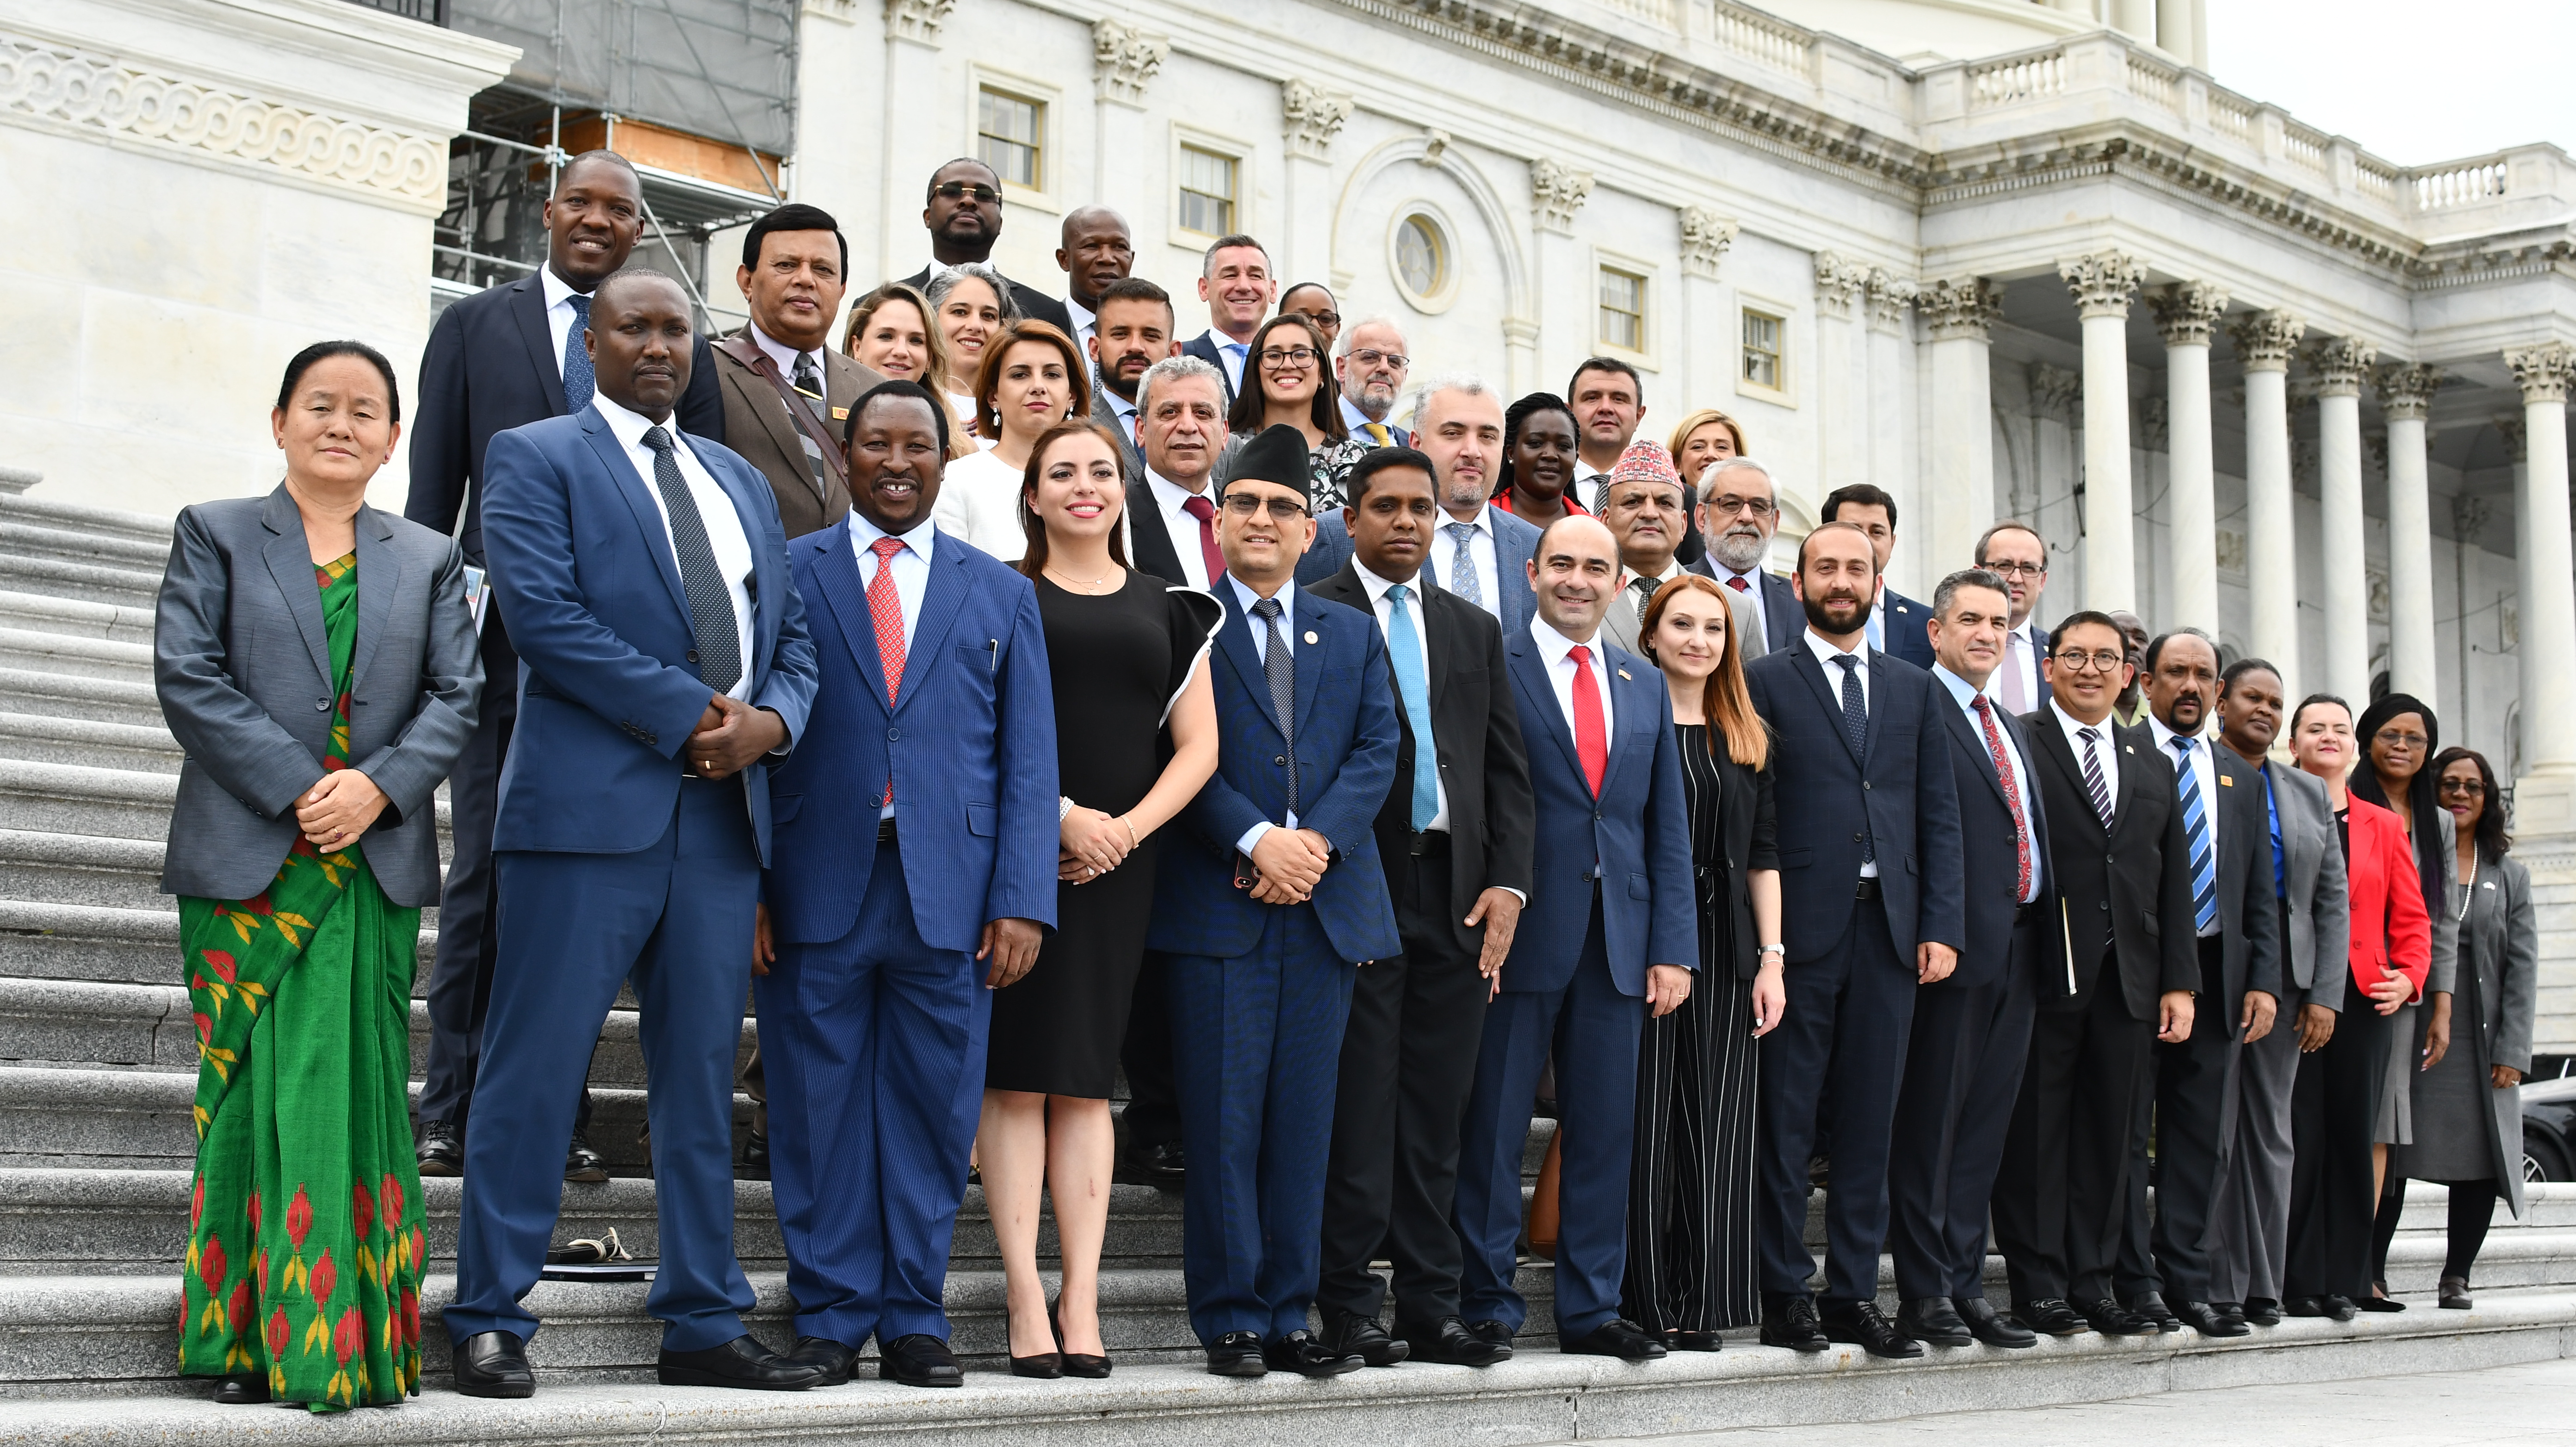 Delegates to the HDP Leadership Forum pose on the steps of the U.S. Capitol building.